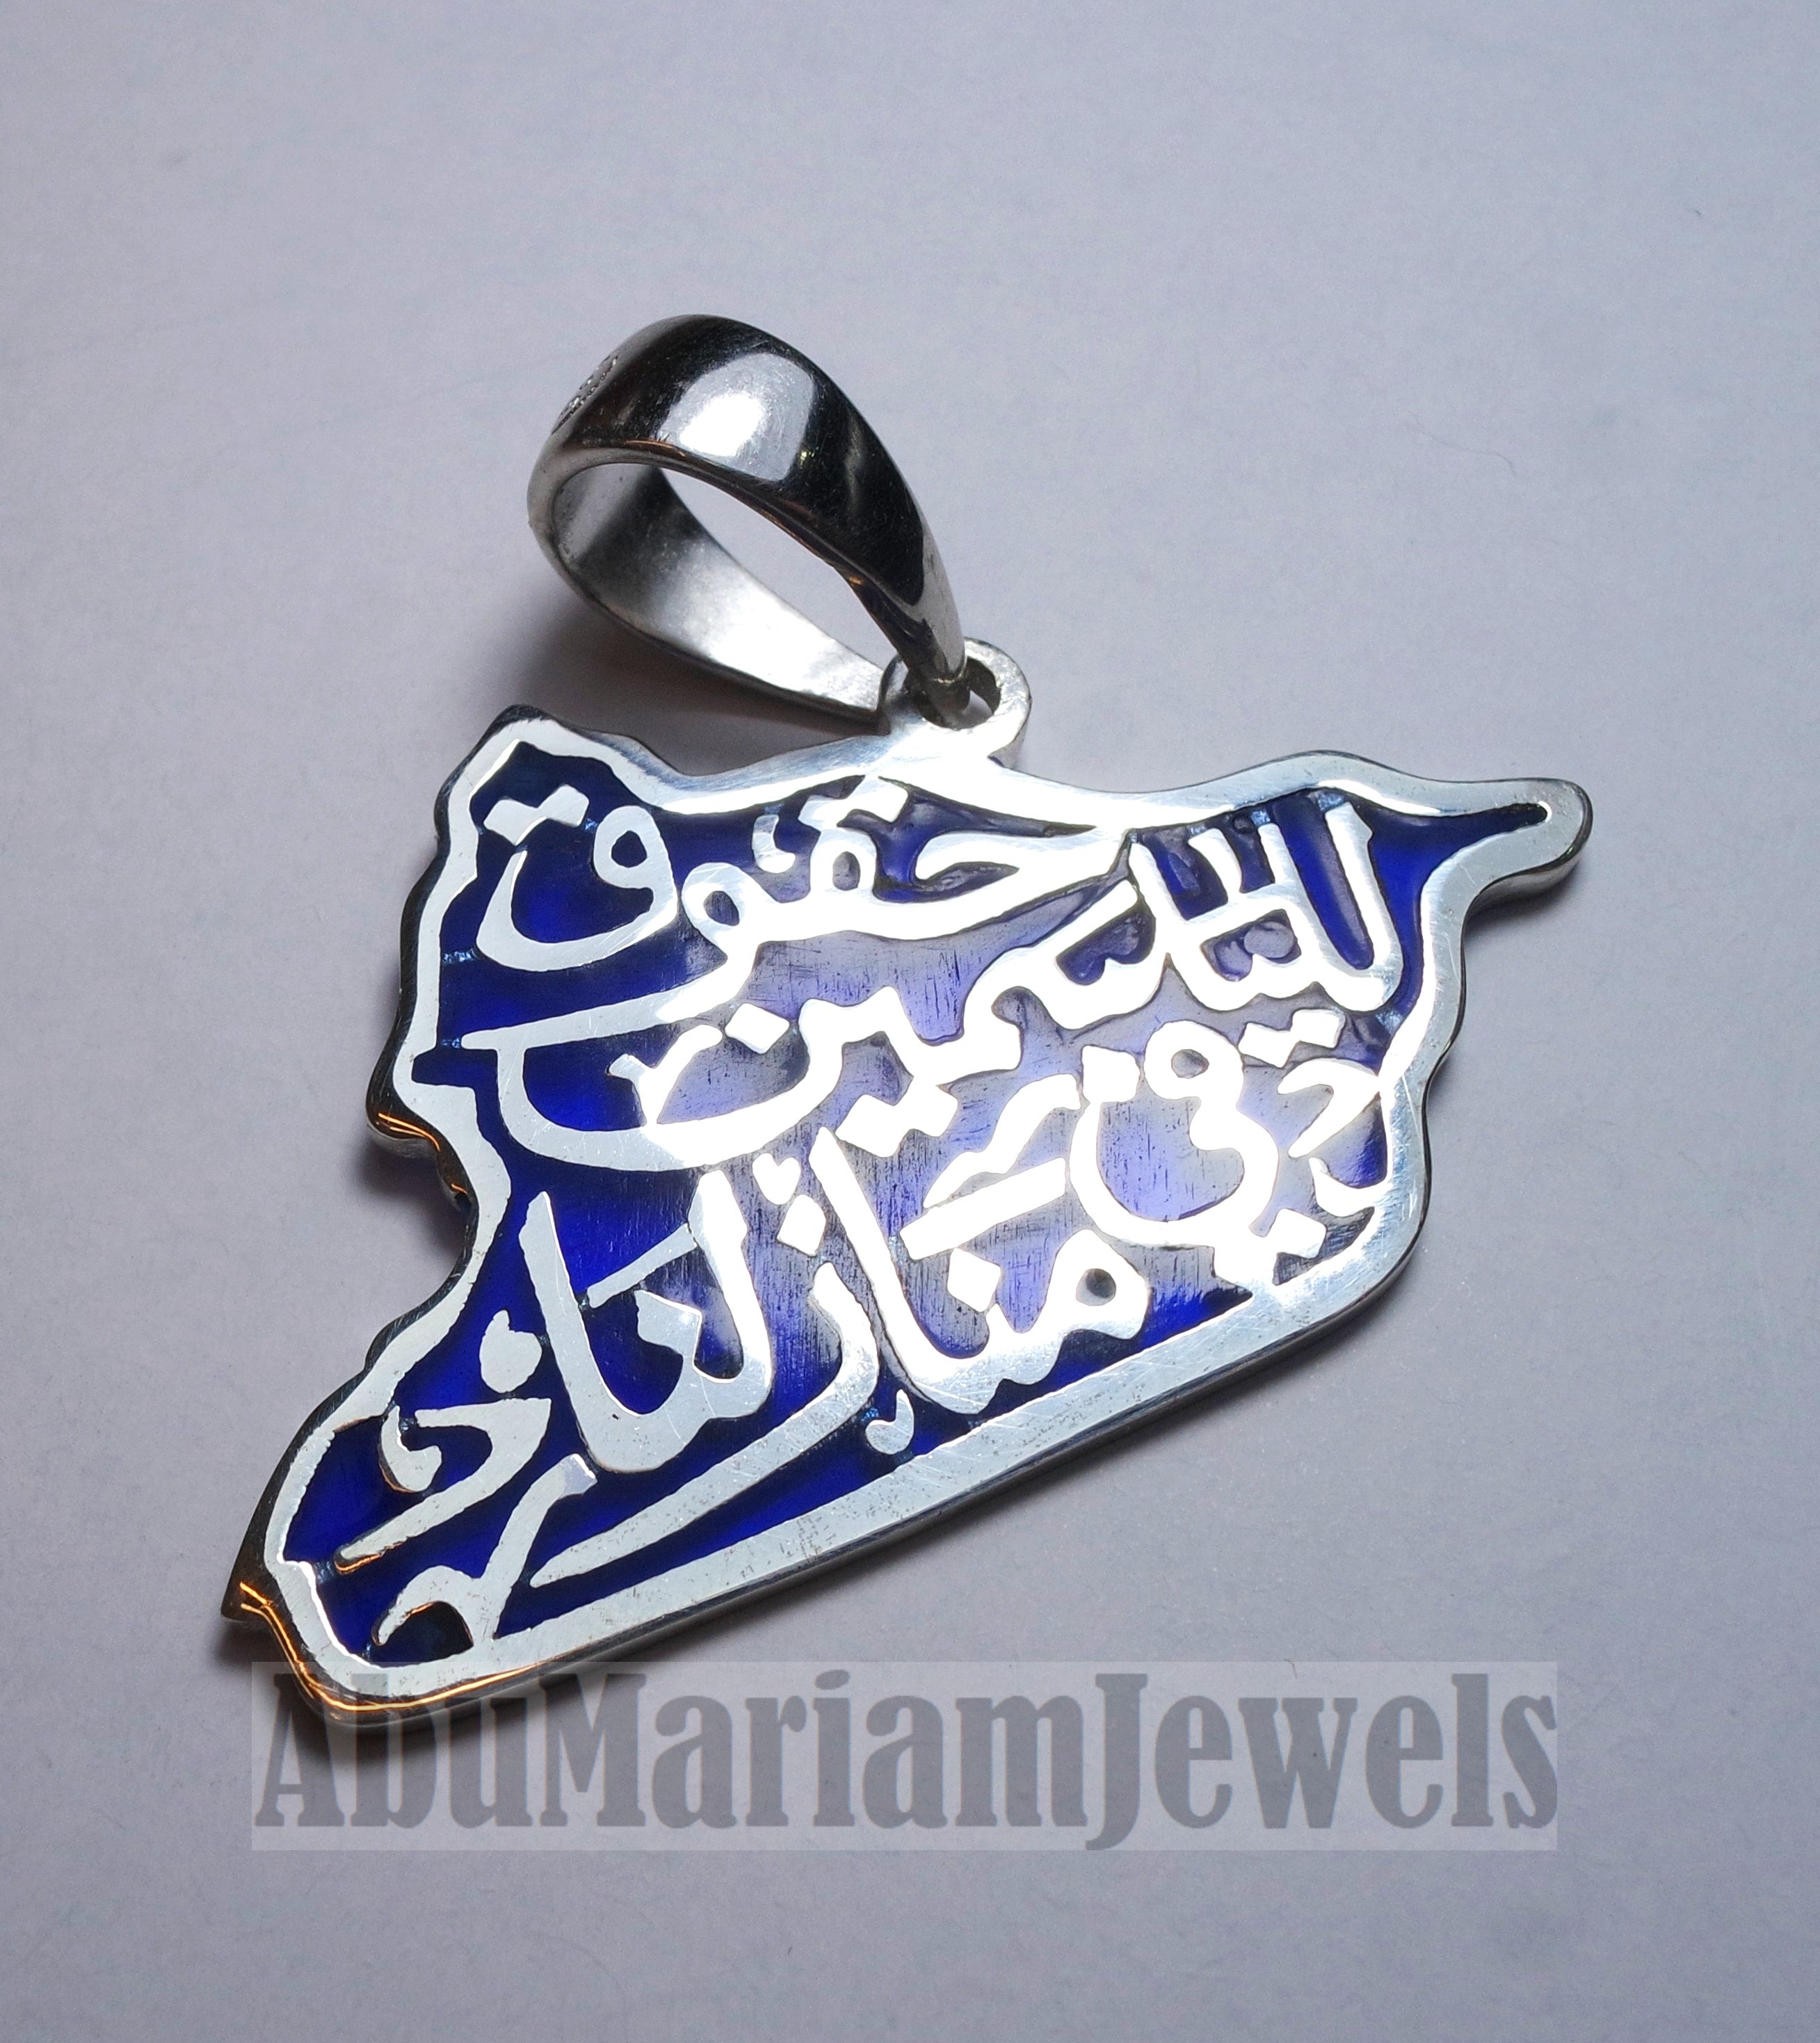 Syria map pendant with thick chain famous poem verse sterling silver 925 dark blue enamel مينا high quality jewelry arabic fast shipping خارطه سوريا